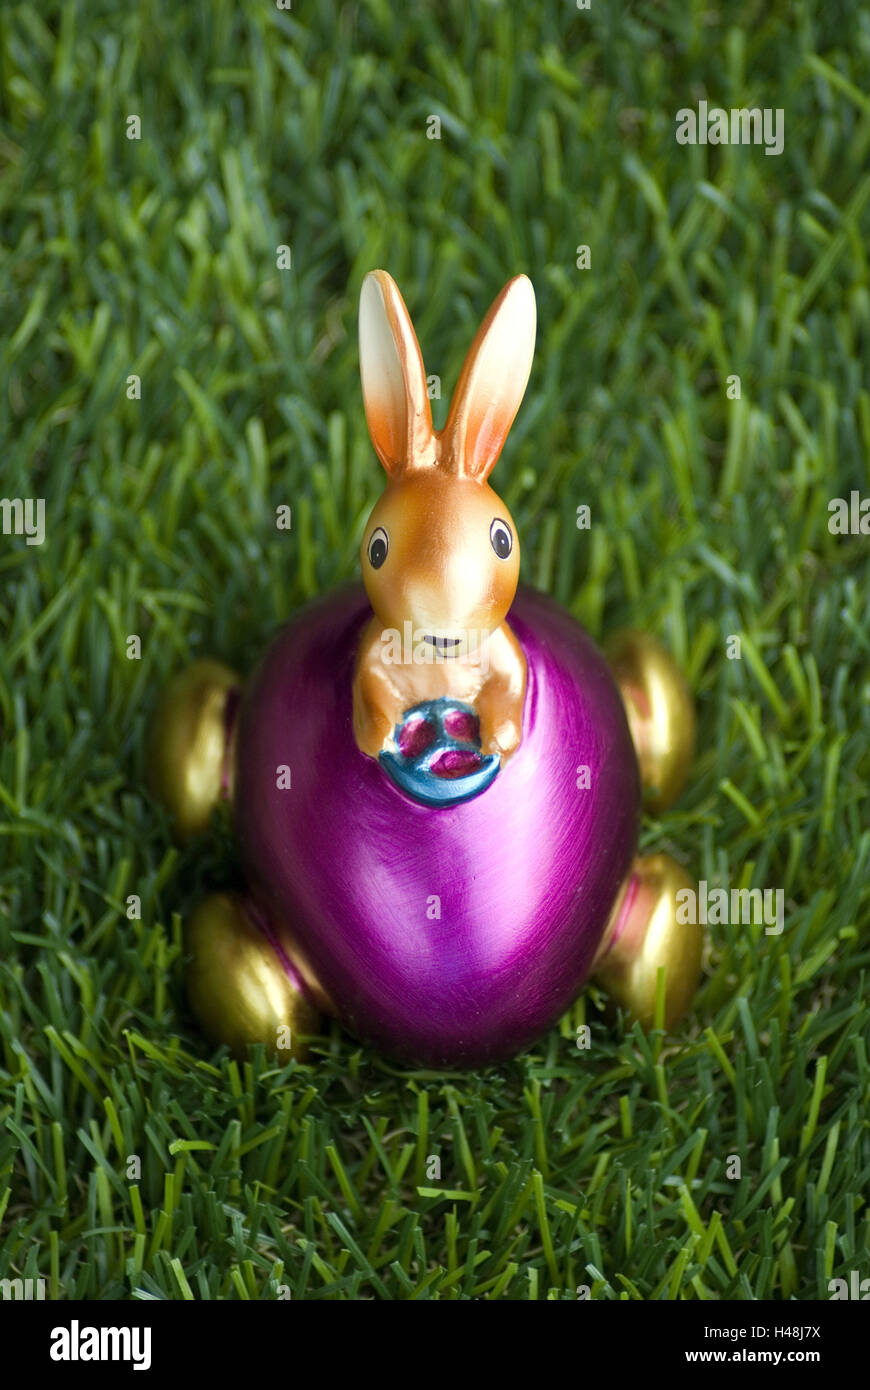 Osterdeko, Easter bunny, egg, decoration, kitsch, Easter, hare, mauve, pink, go, Easter egg, grass, Easter feast, decorate, character, toys, decoration, Stock Photo